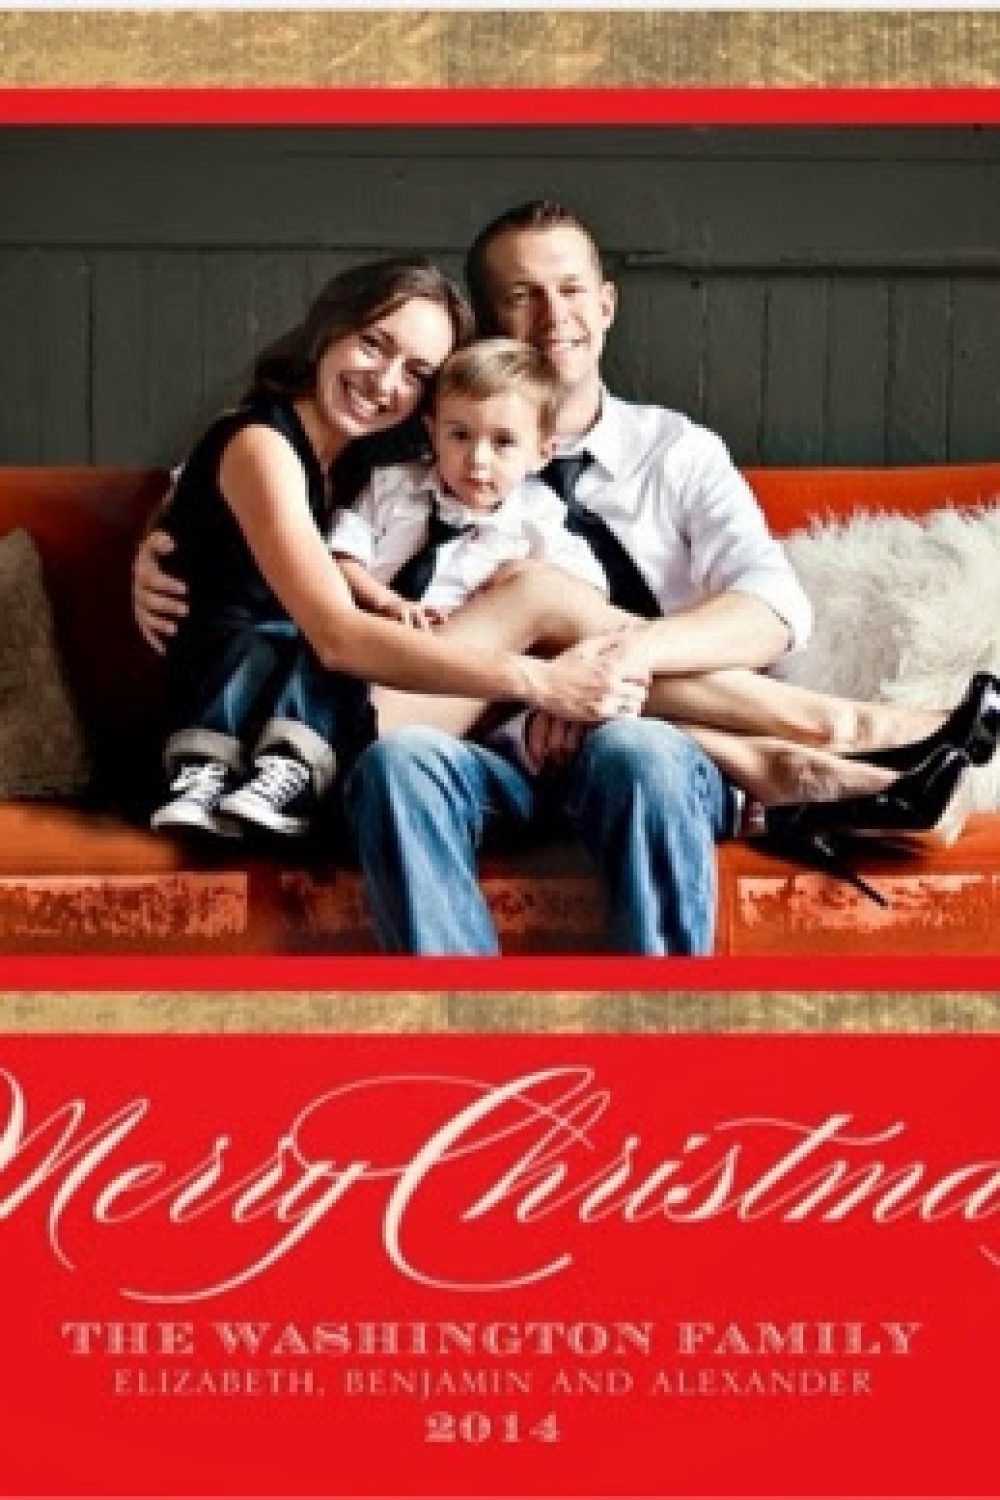 Whiny Wednesday: This Year’s Christmas Card from Tiny Prints